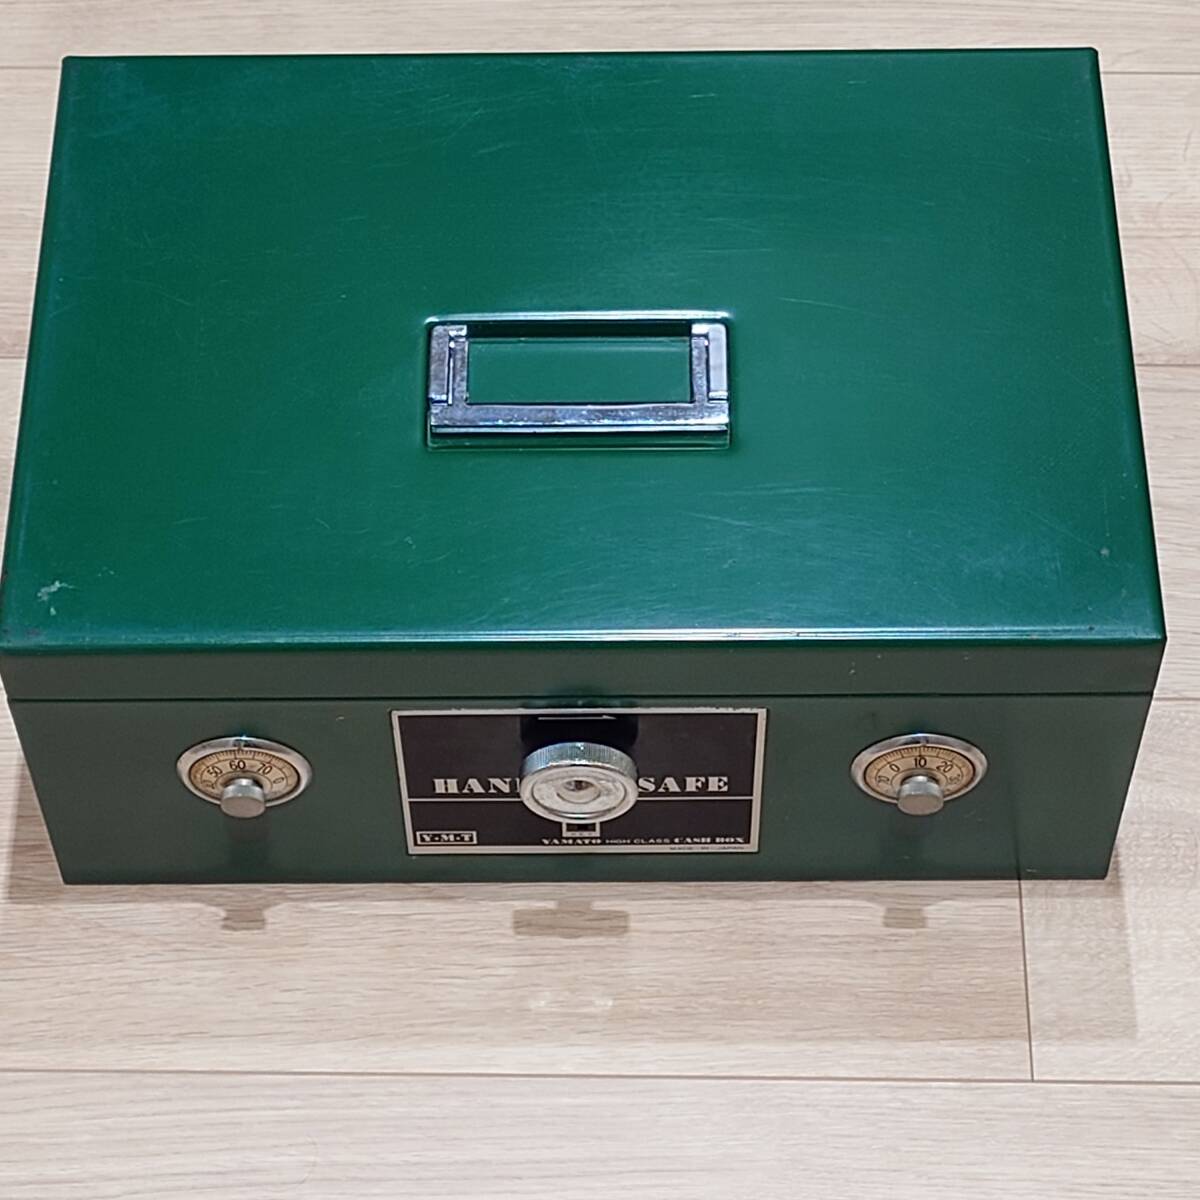  takkyubin (home delivery service) free shipping handbag safe used tray attaching key 1 pcs / dial type YAMATO made in Japan cashbox green | green retro anonymity delivery 